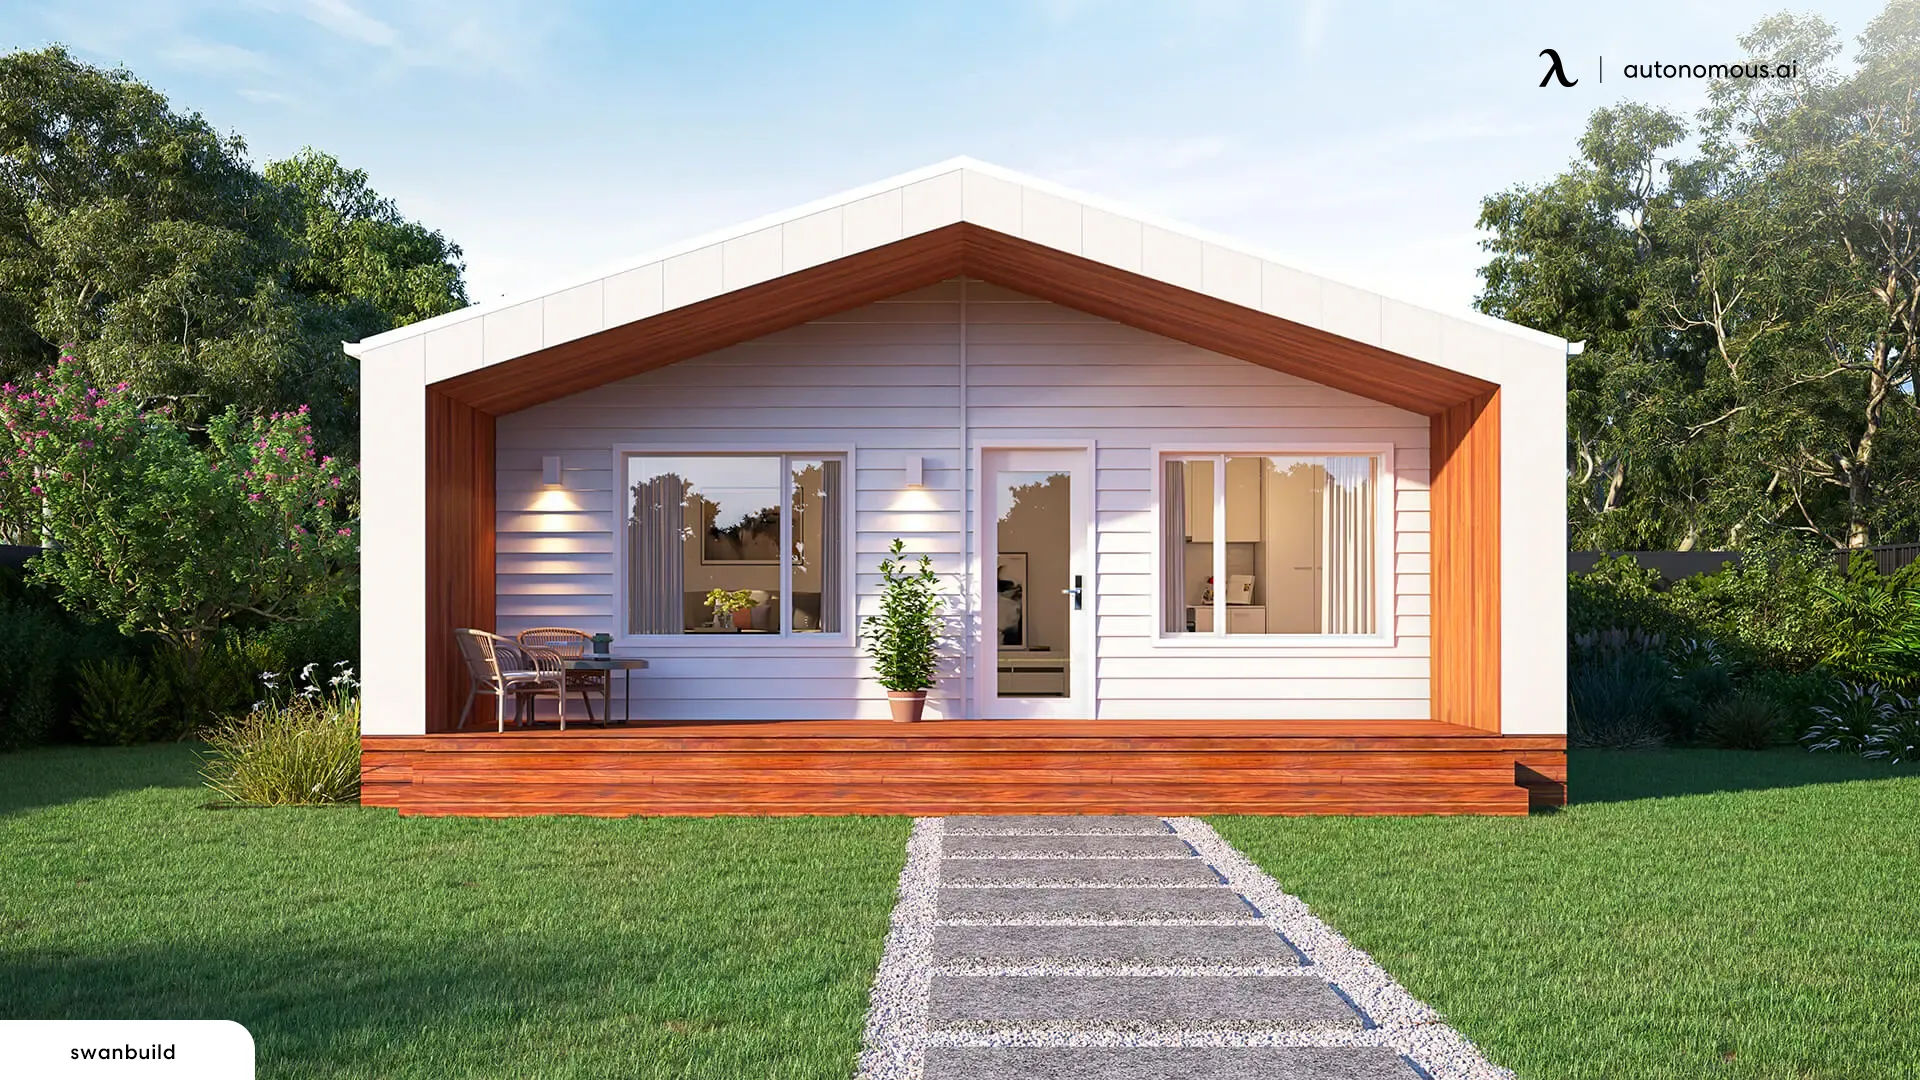 What Can You Expect from a Modular Home?